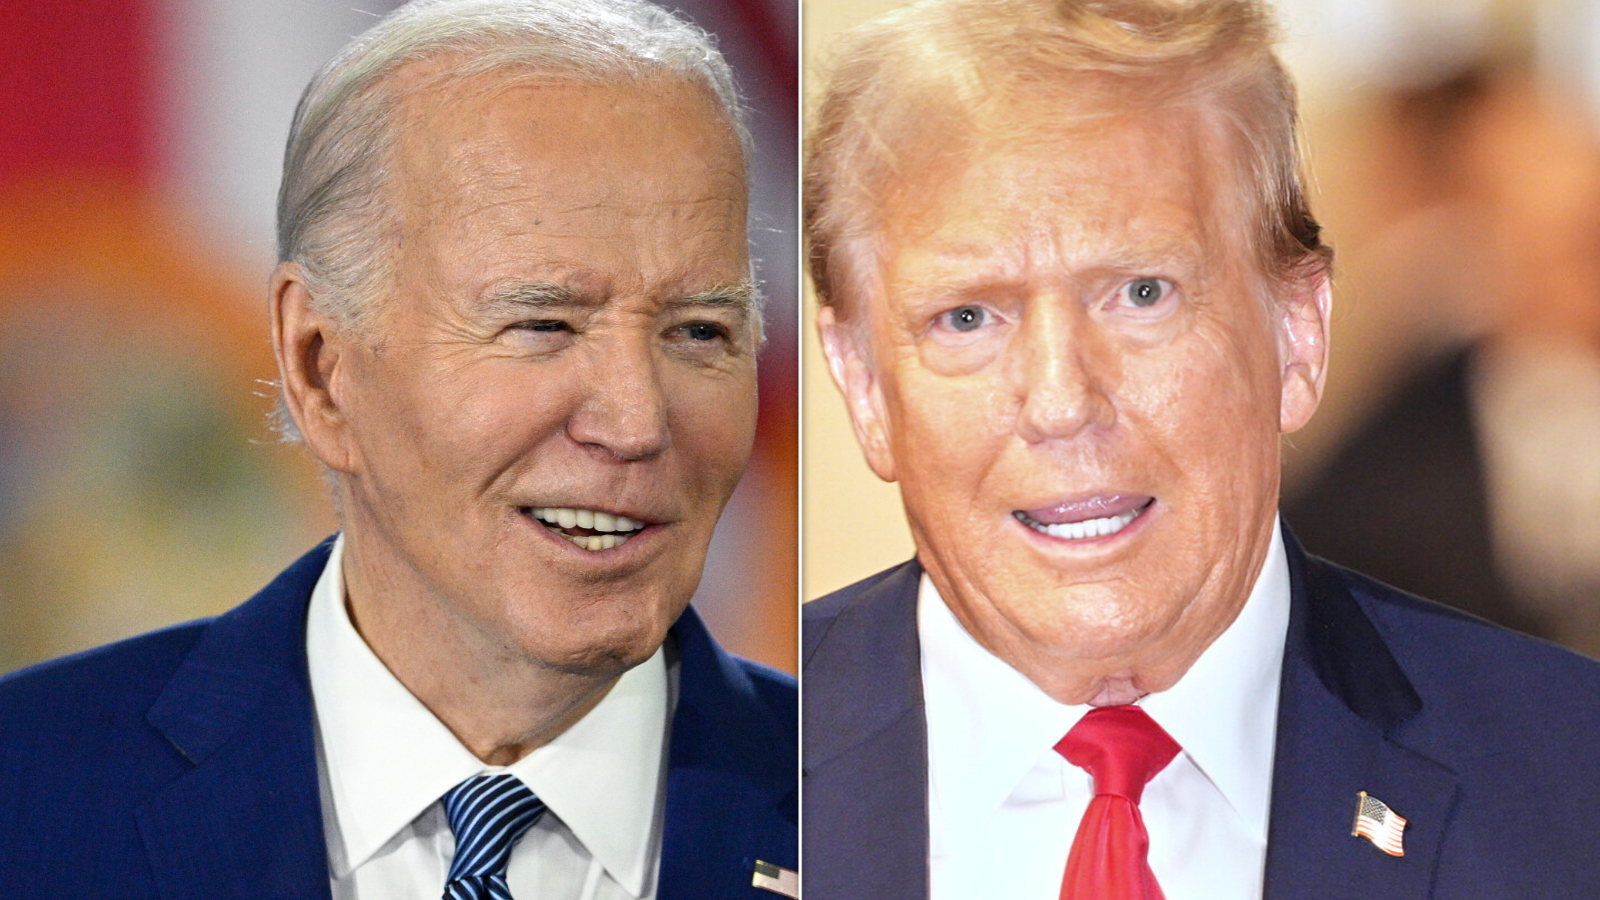 biden campaign trolls donald trump with stark contrast of what he says... and what he does